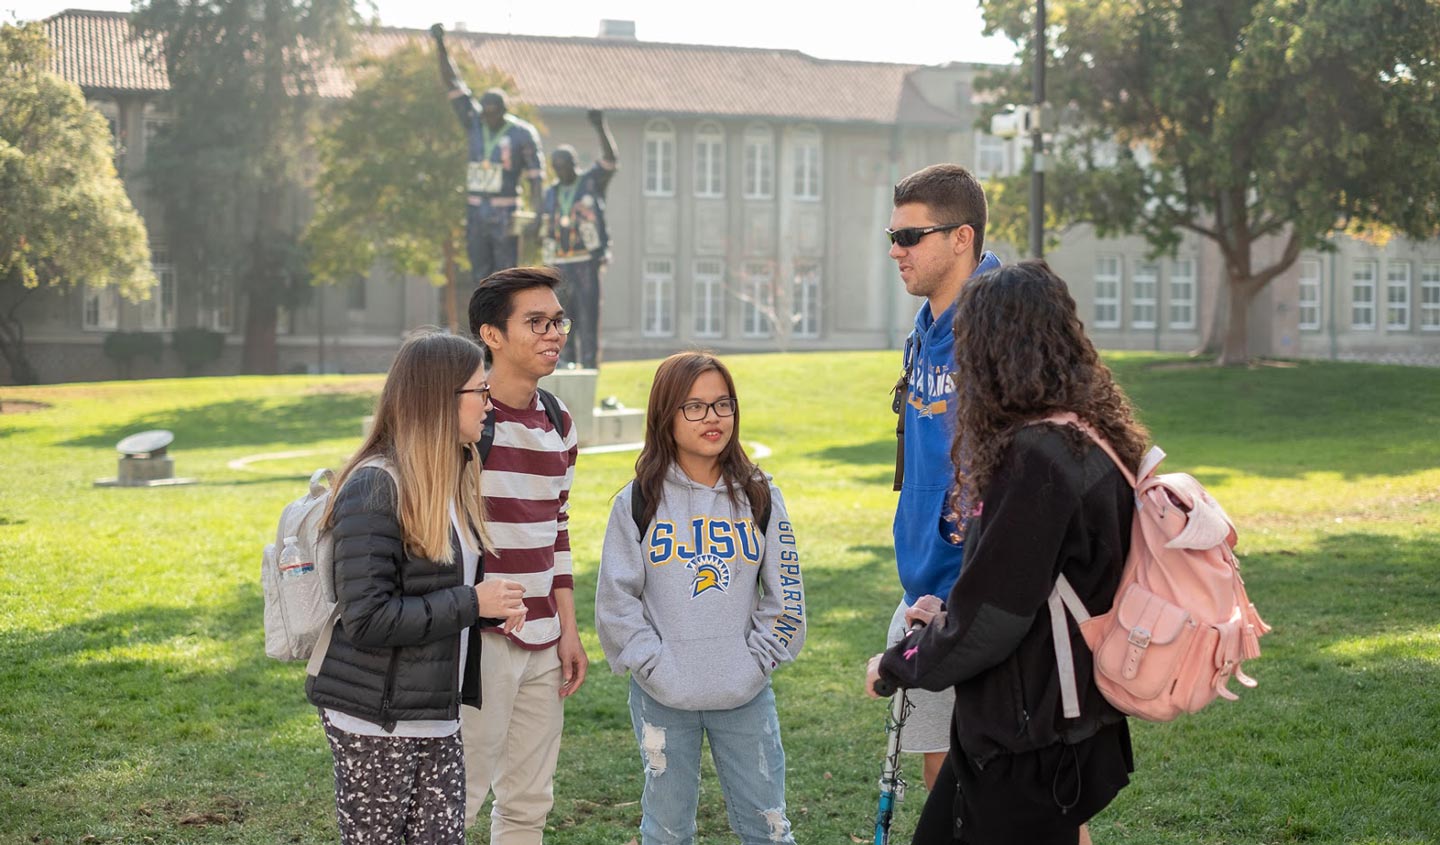 Five students talking on San José State University’s Tower Lawn with the Vicotry Salute monument in the distance.